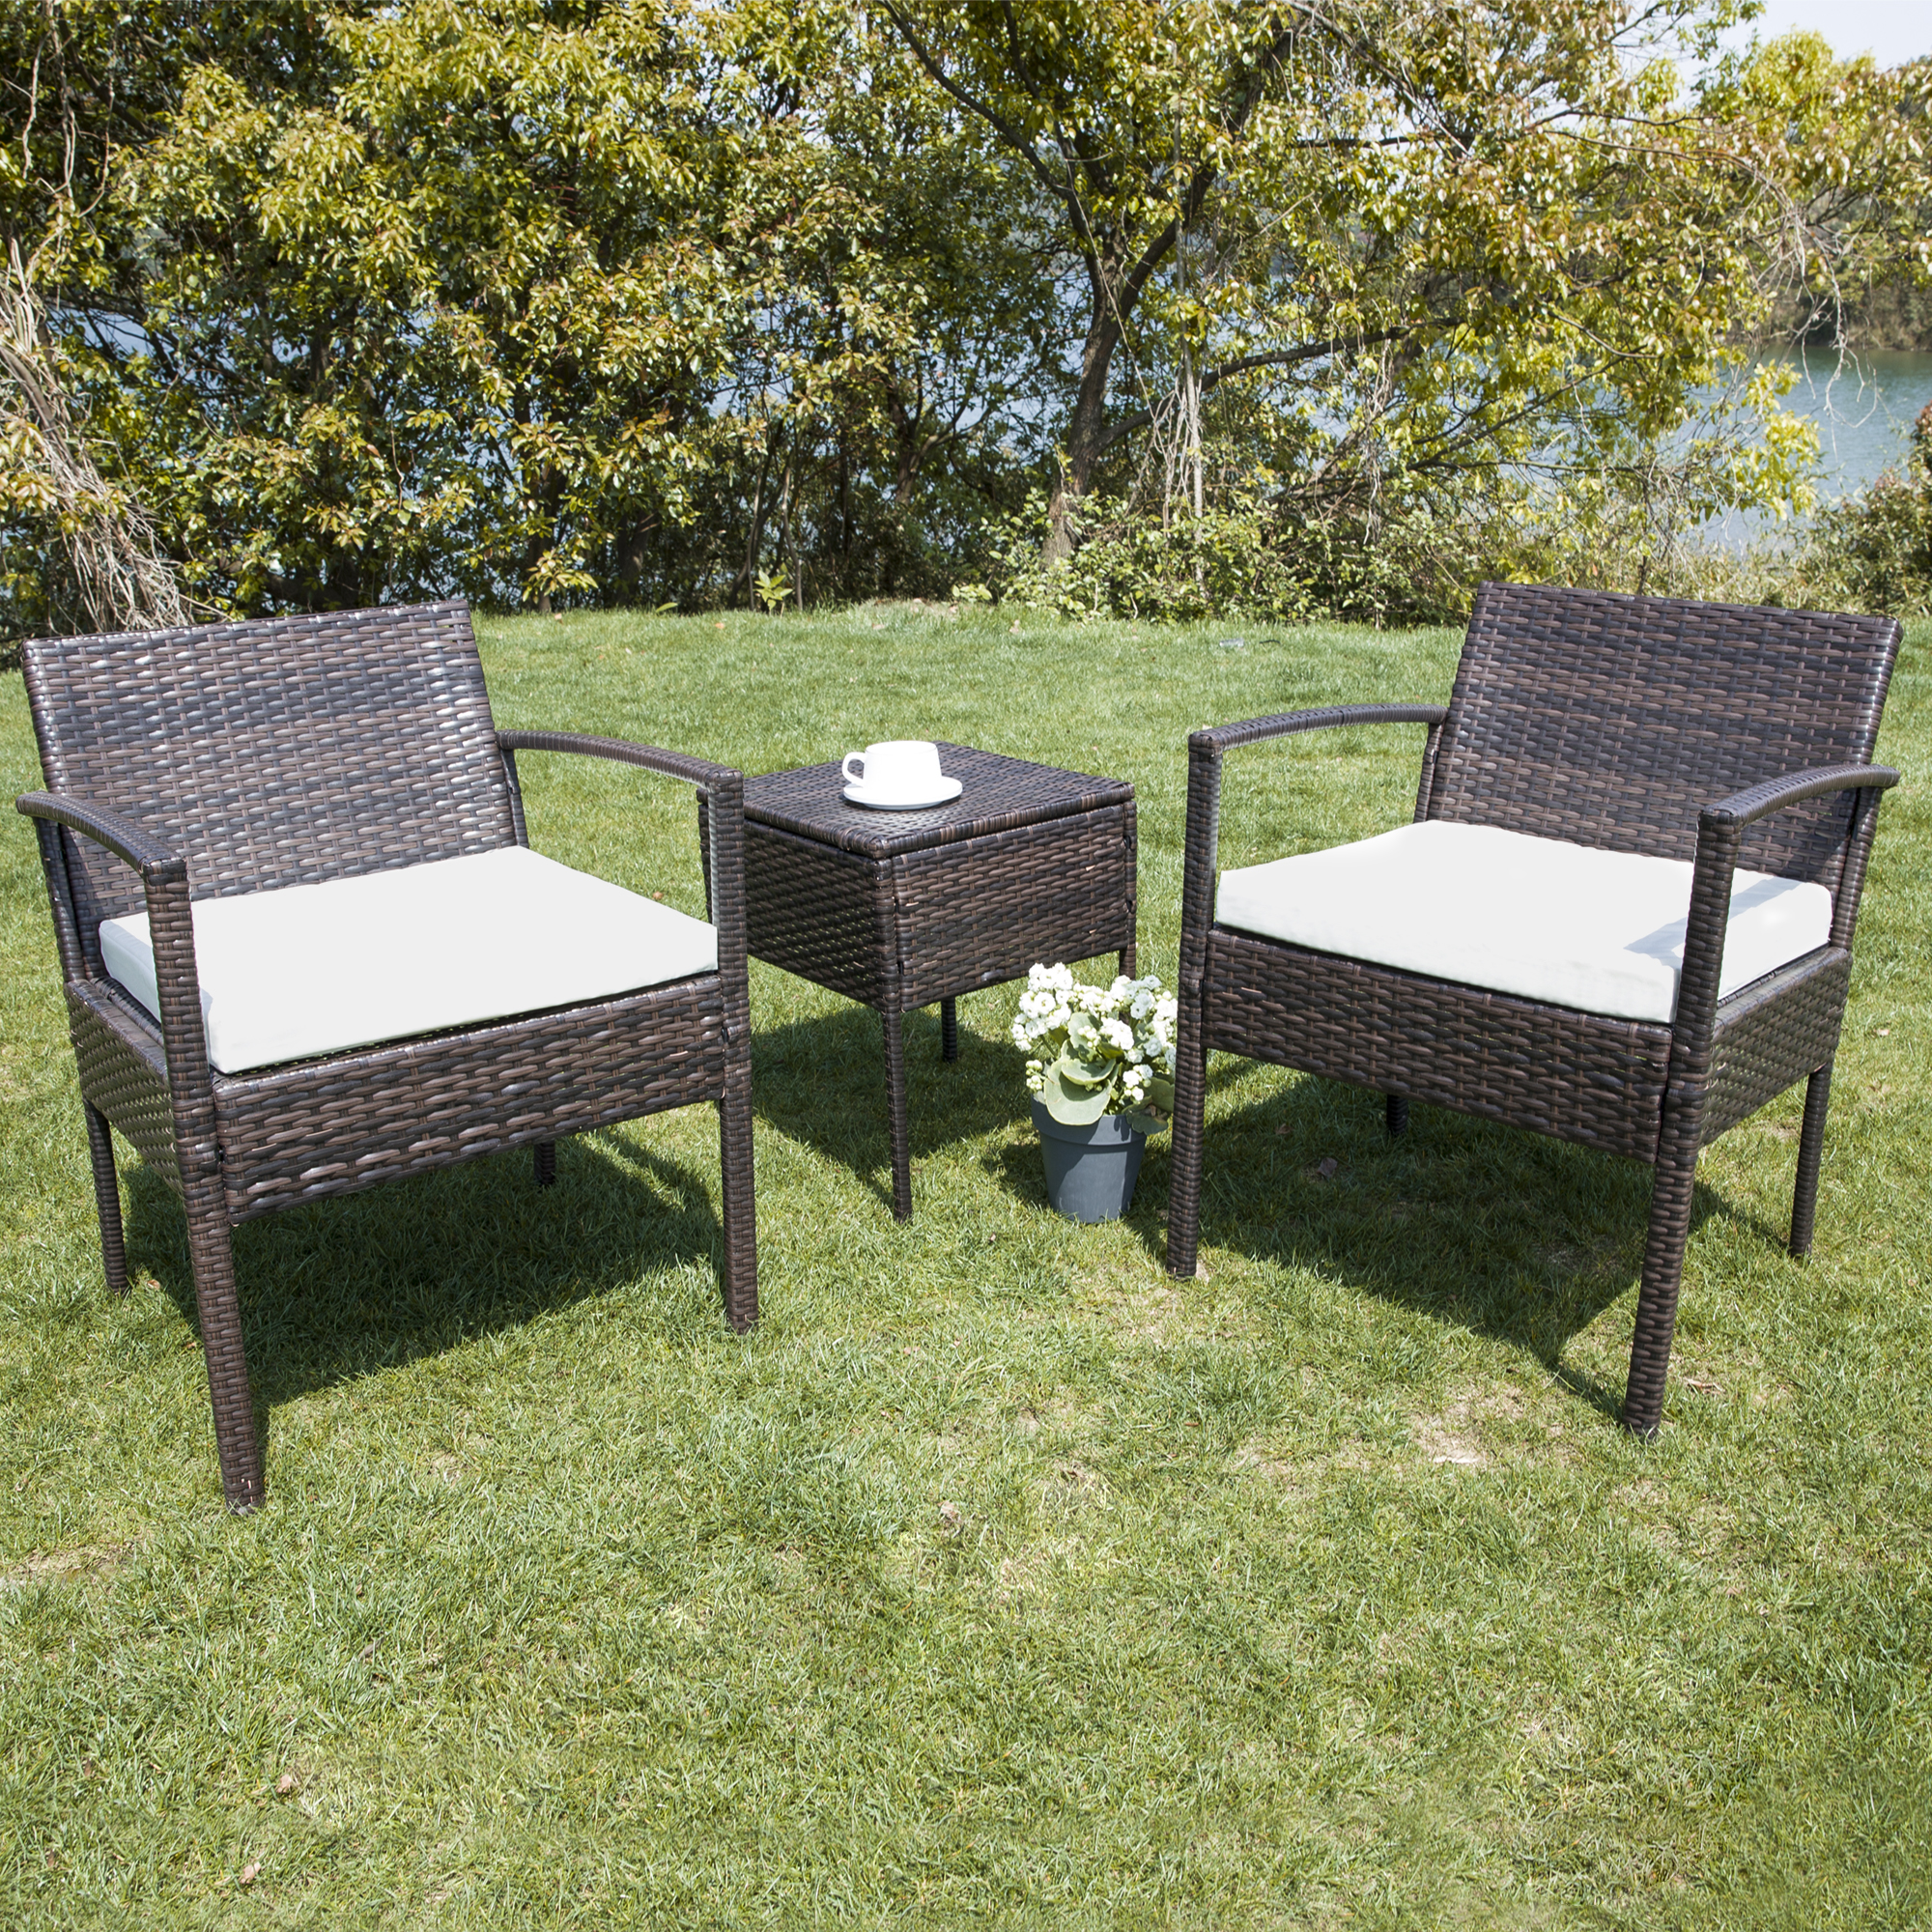 FHFO Patio Furniture Set Outdoor Furniture Outdoor Patio Furniture Set 3 Pieces Patio Conversation Set Table and Chairs with Cushions for Garden Balcony Backyard Porch Lawn Brown Rattan White Cushion - image 4 of 6